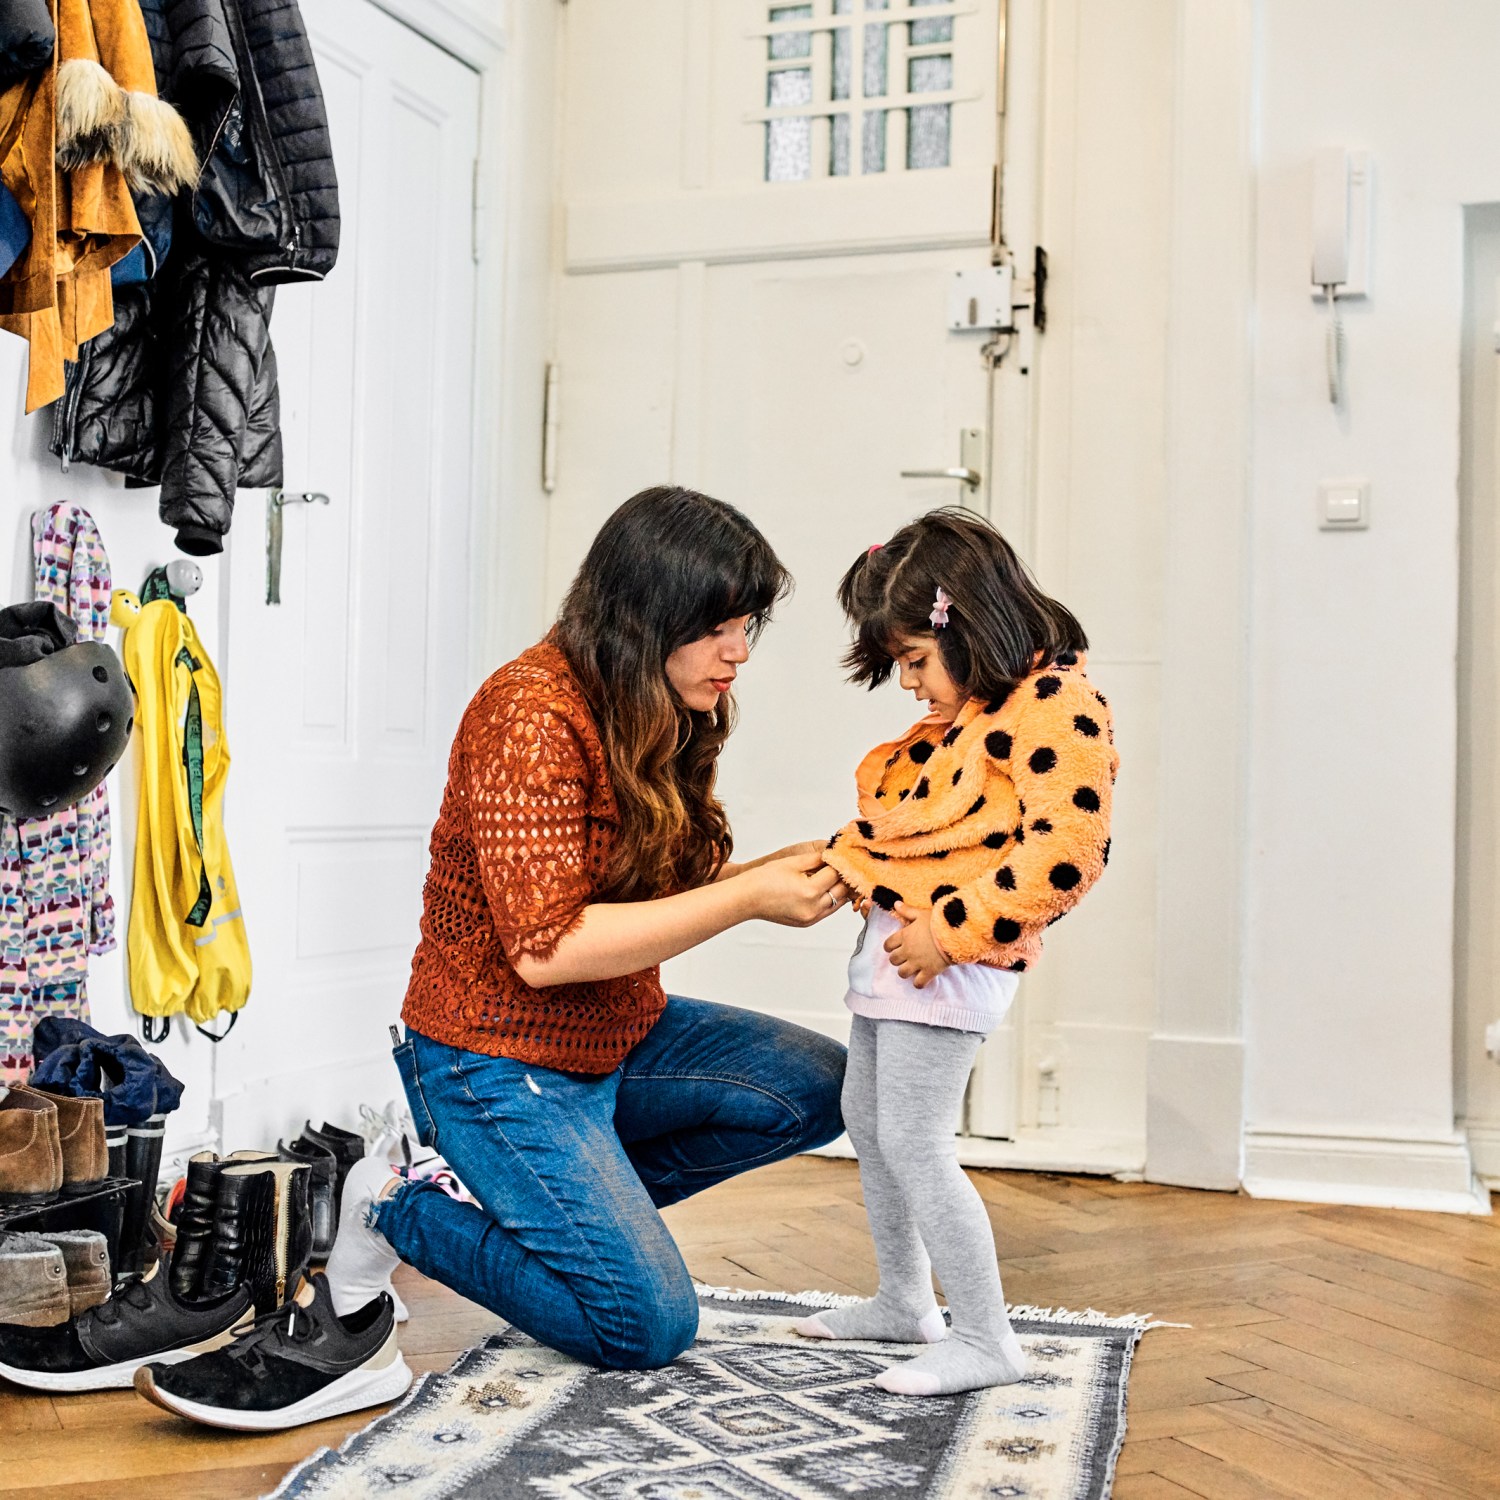 mother helping young girl put on jacket in mudroom entryway of home